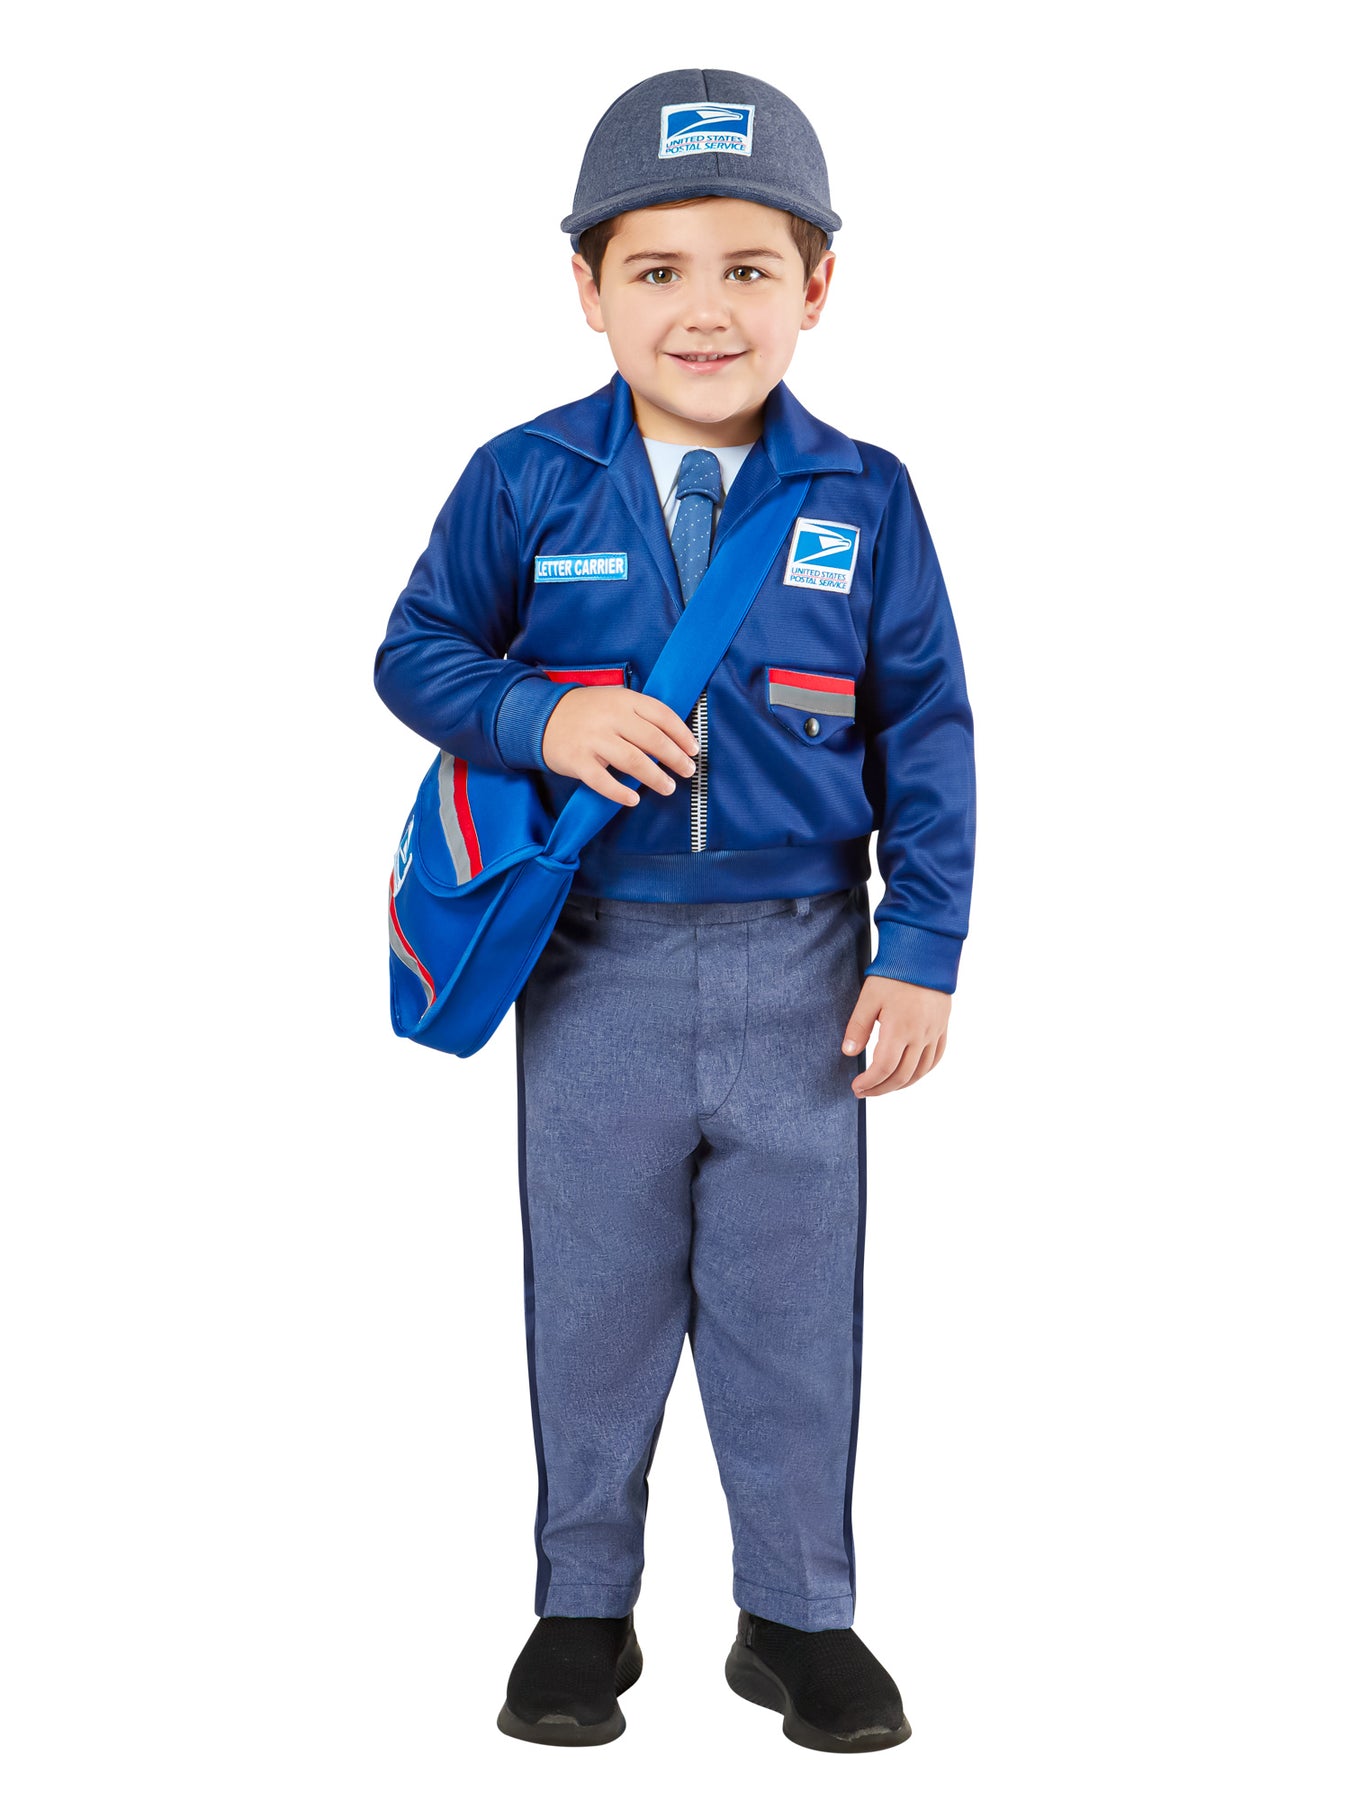 United States Postal Service Costumes & Accessories